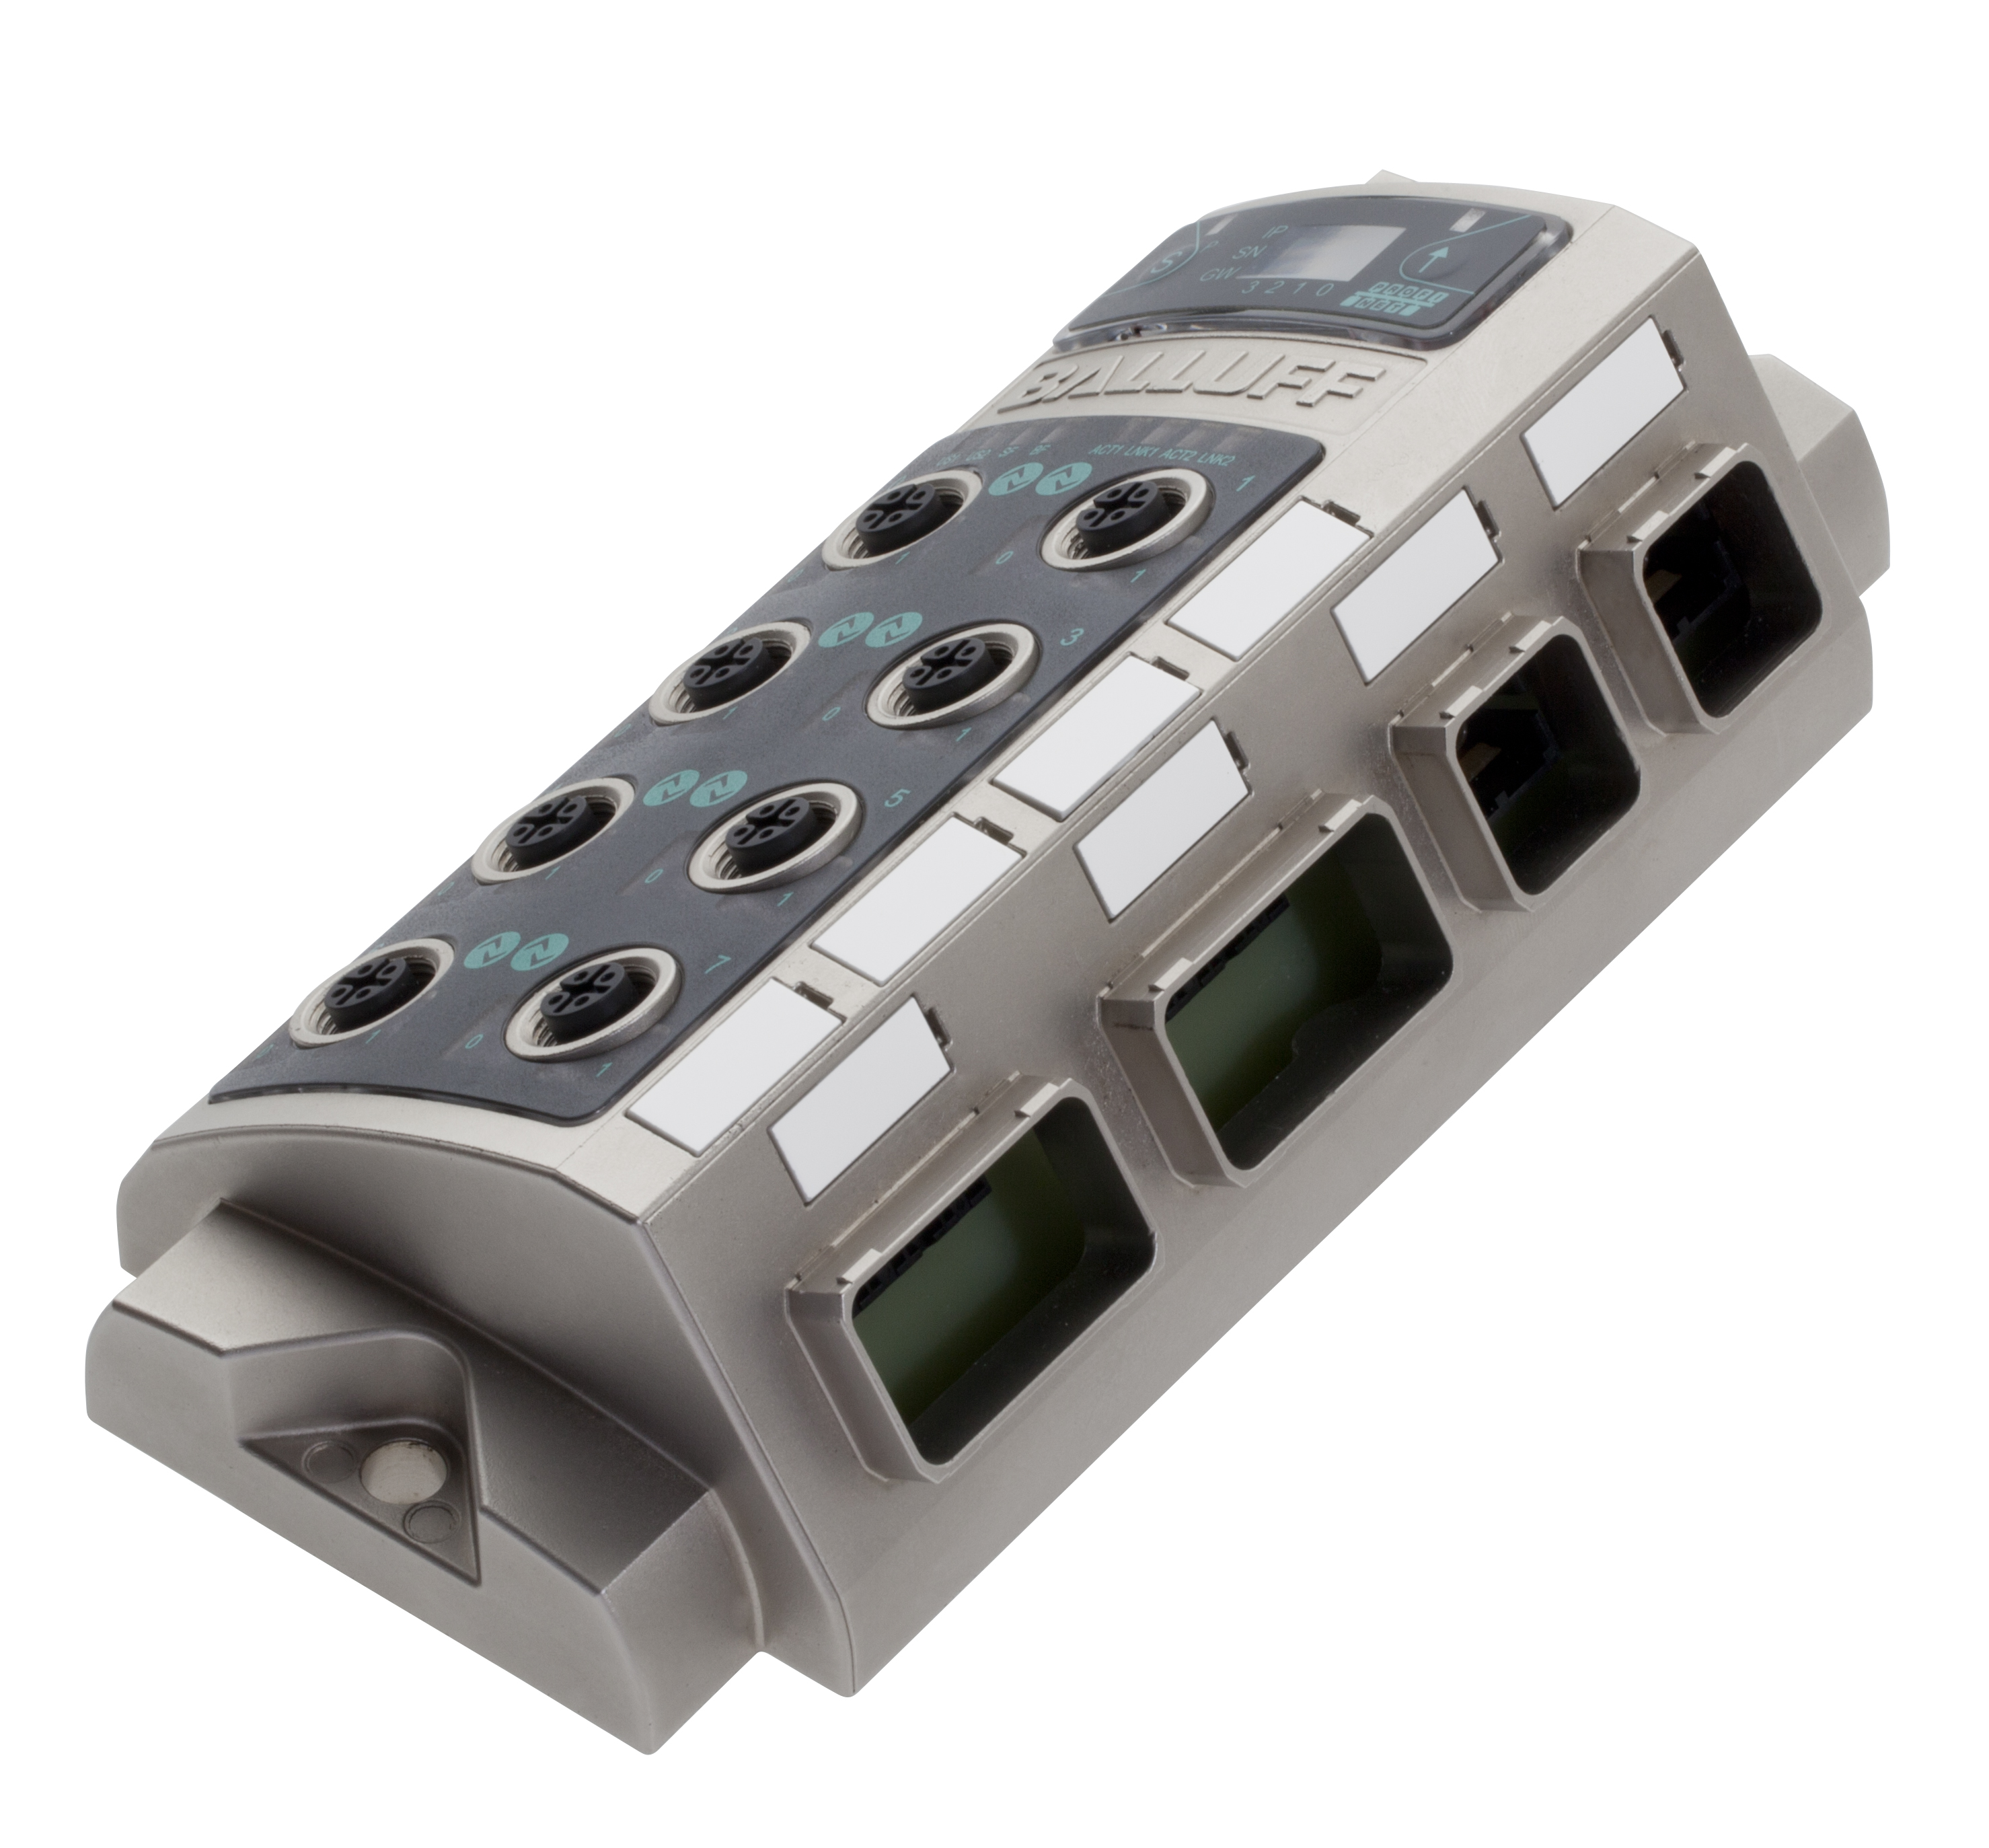 Read more about the article PROFINET: Push-pull IO-Link Master Modules from Balluff